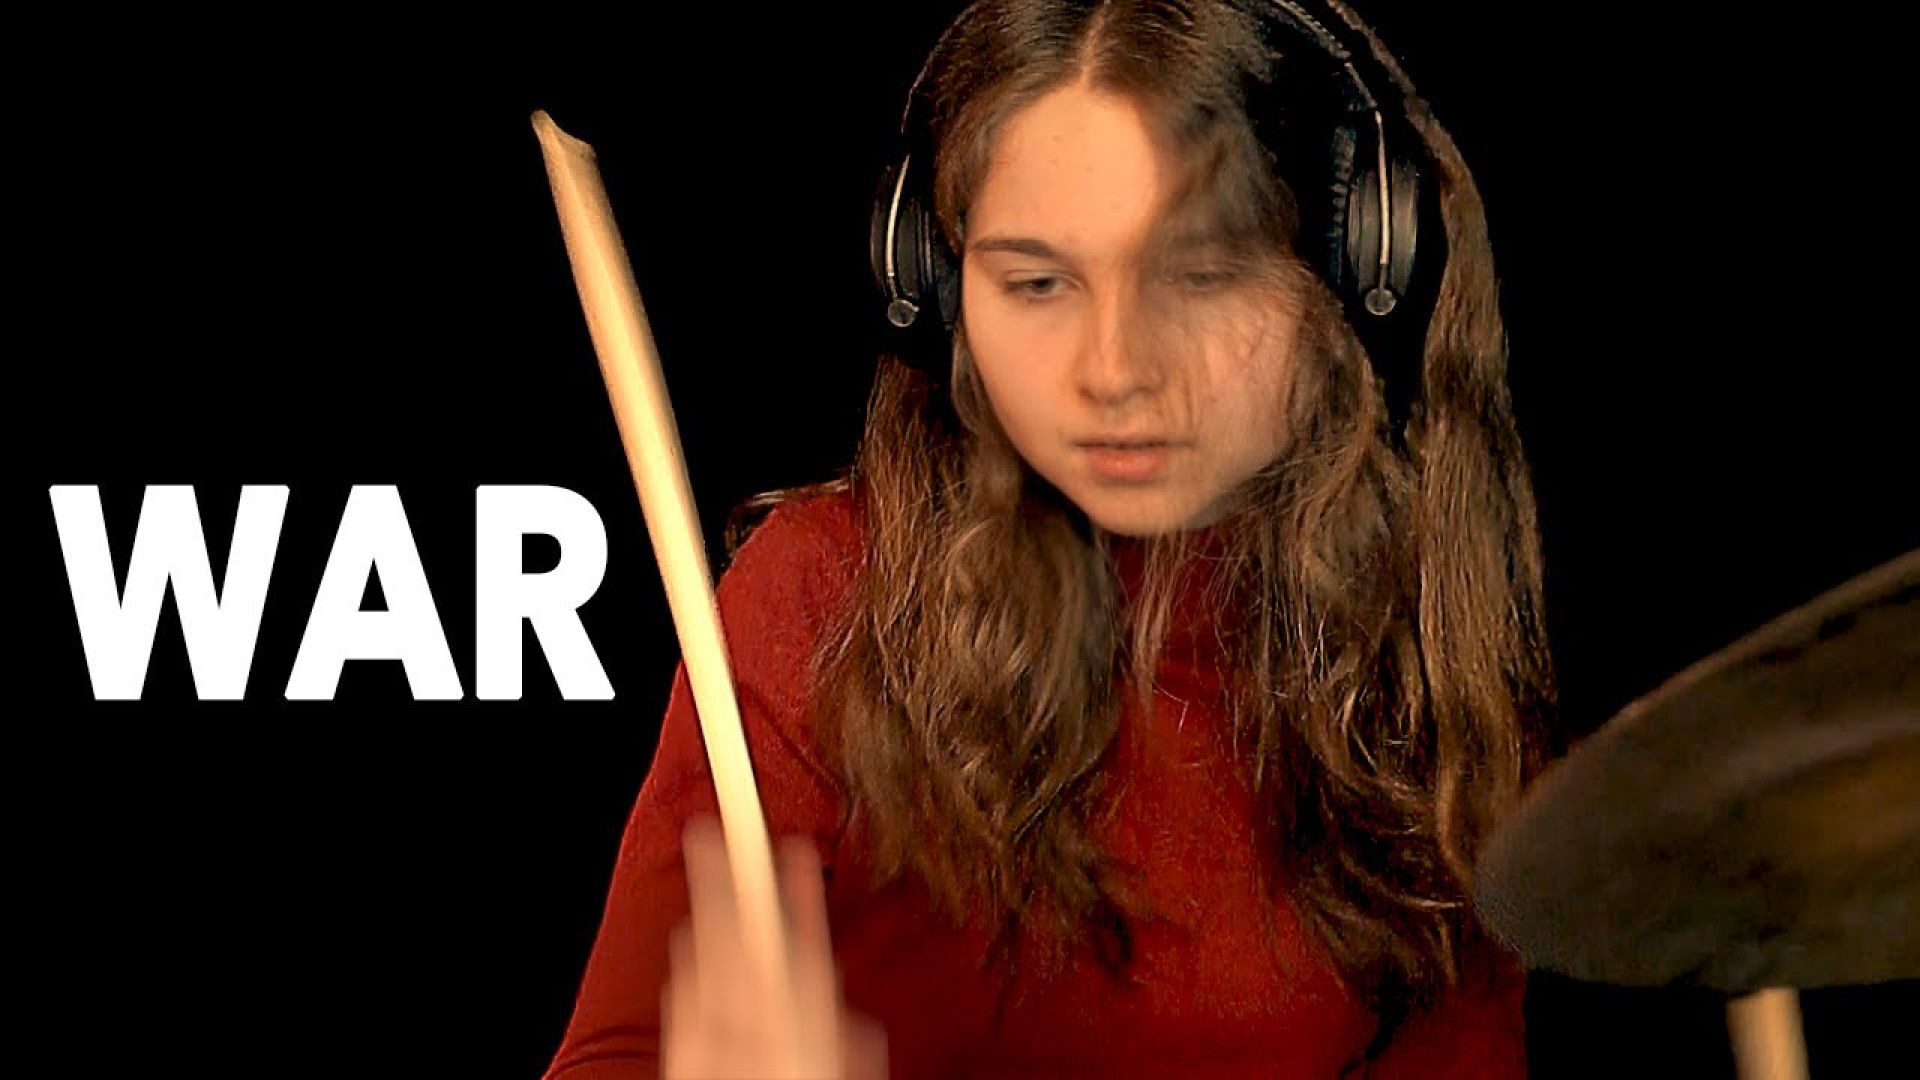 War (Edwin Starr); drum cover by Sina